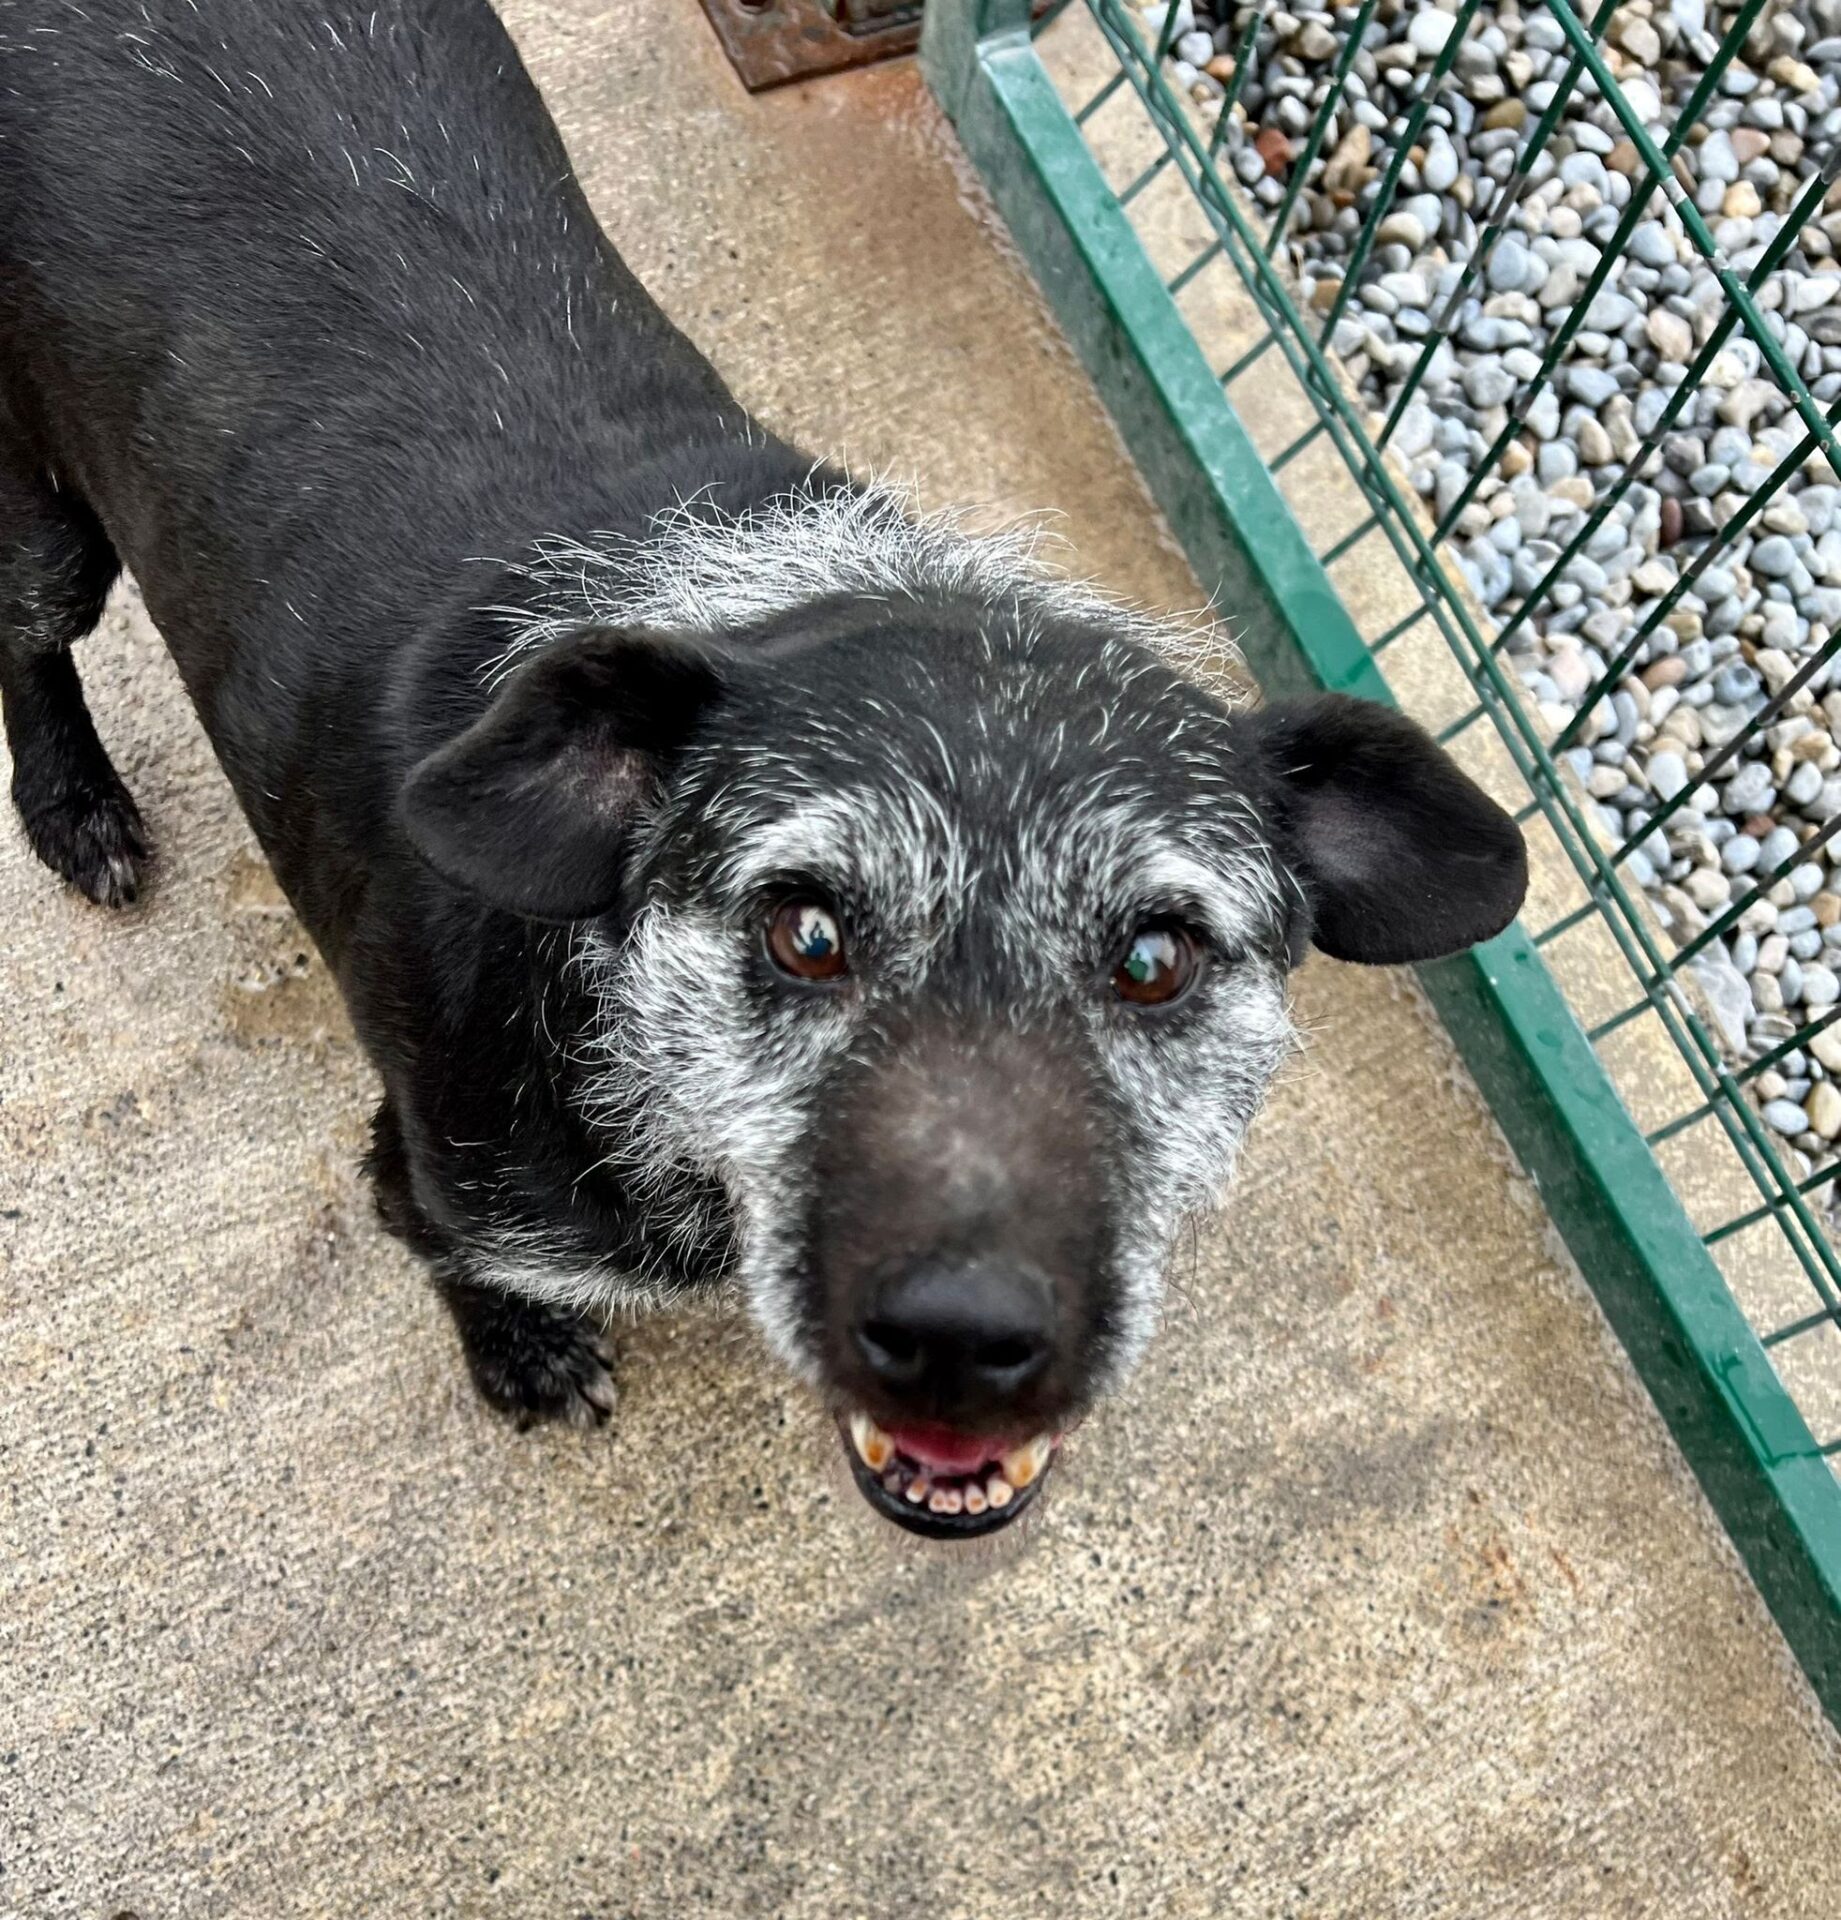 Hardest to rehome – Ted, senior dog edition